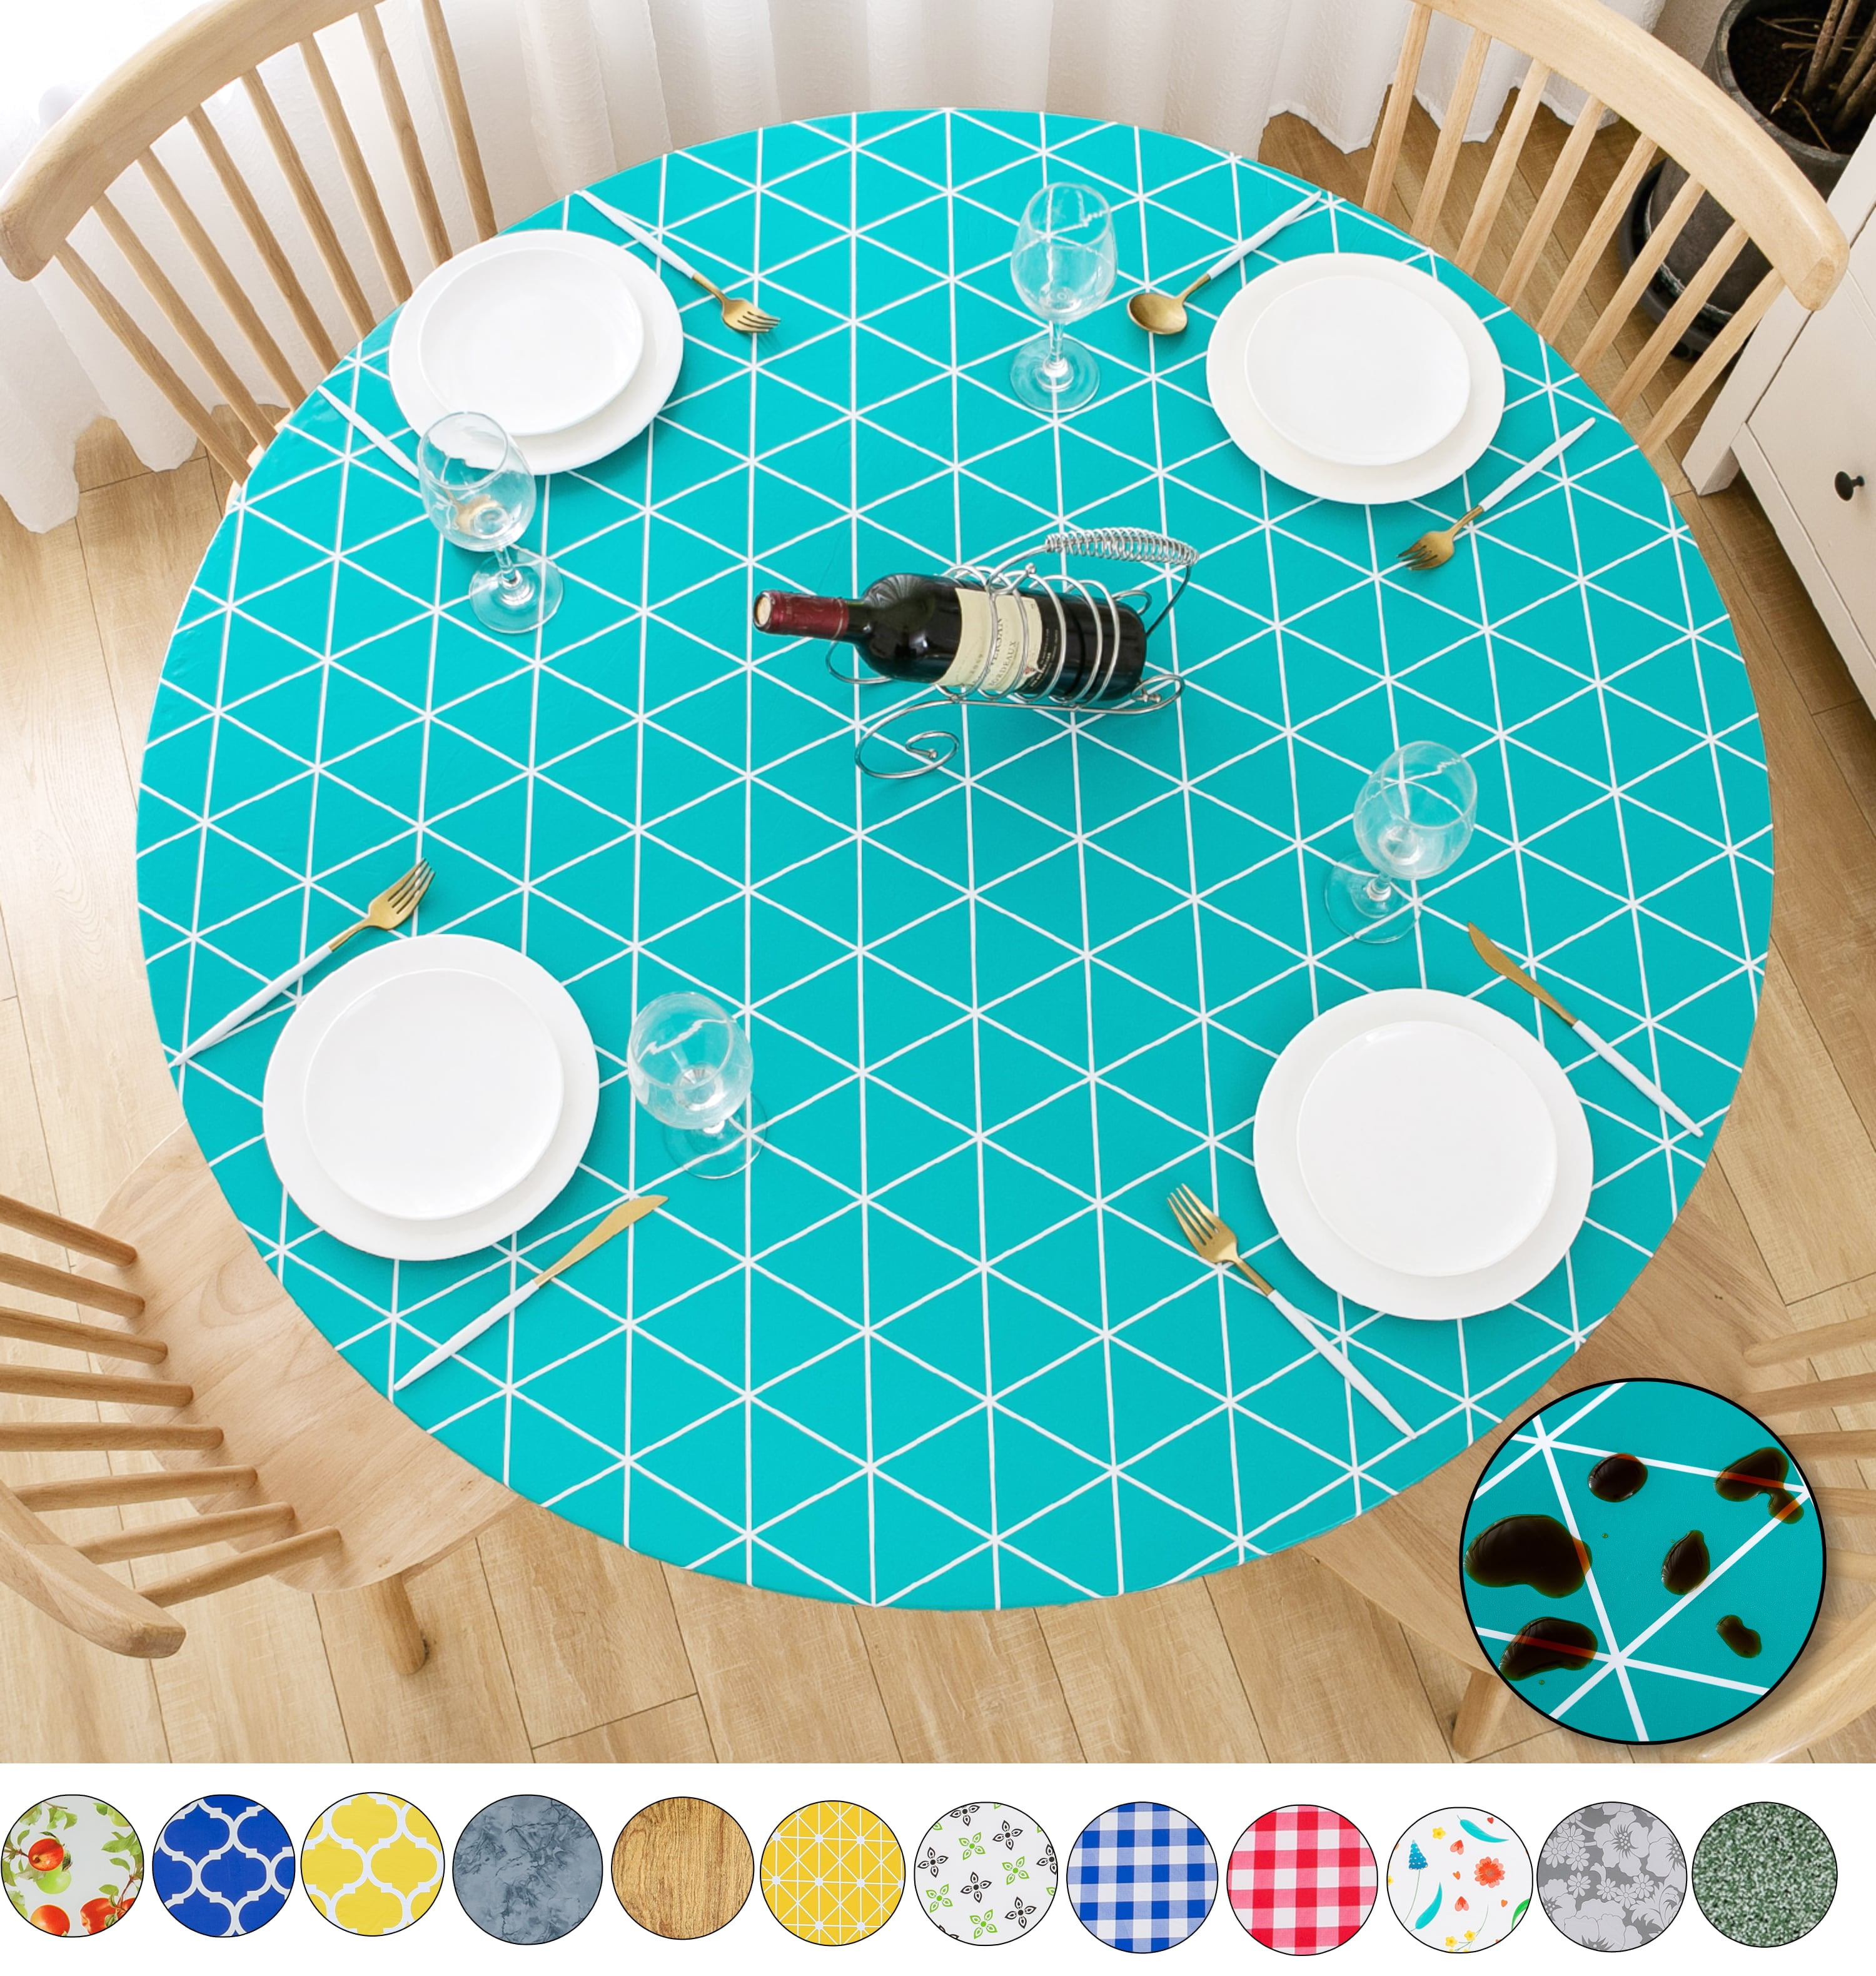 LKHF Indoor Outdoor Patio Round Fitted Vinyl Tablecloth Flannel Elastic Edge Waterproof Plastic Cover